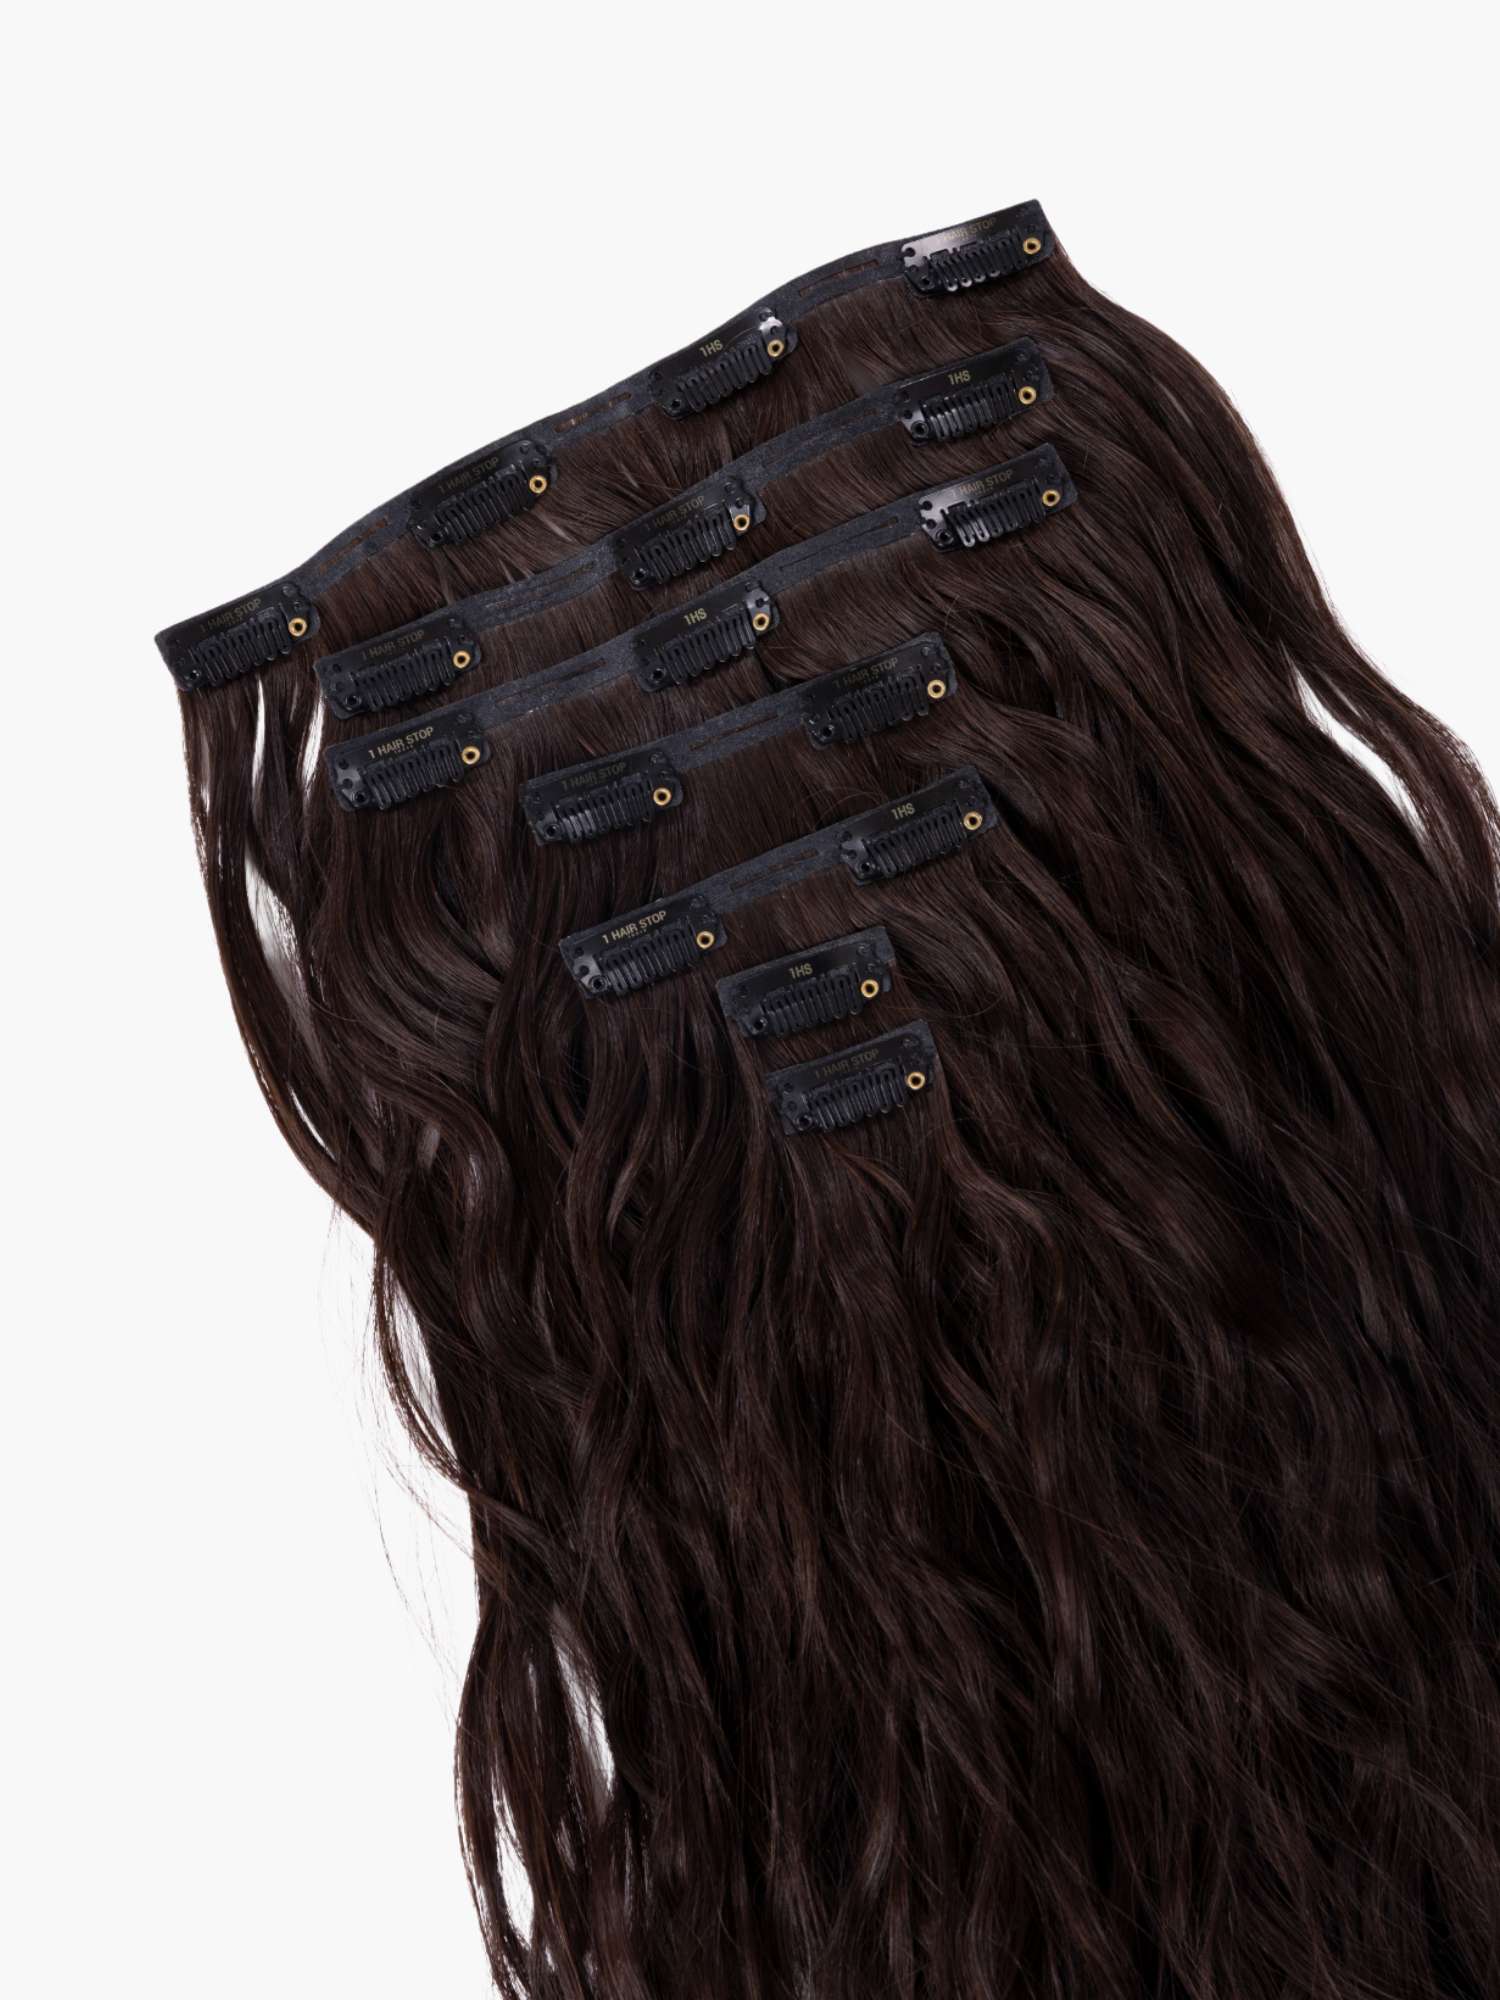 PrettyShineHair 100 Original Remy Real Human Extension Curly Clips On  5Pcs Curly For Women  Girls 20 inches 100 Grams Natural Black Hair  Extension Price in India  Buy PrettyShineHair 100 Original 